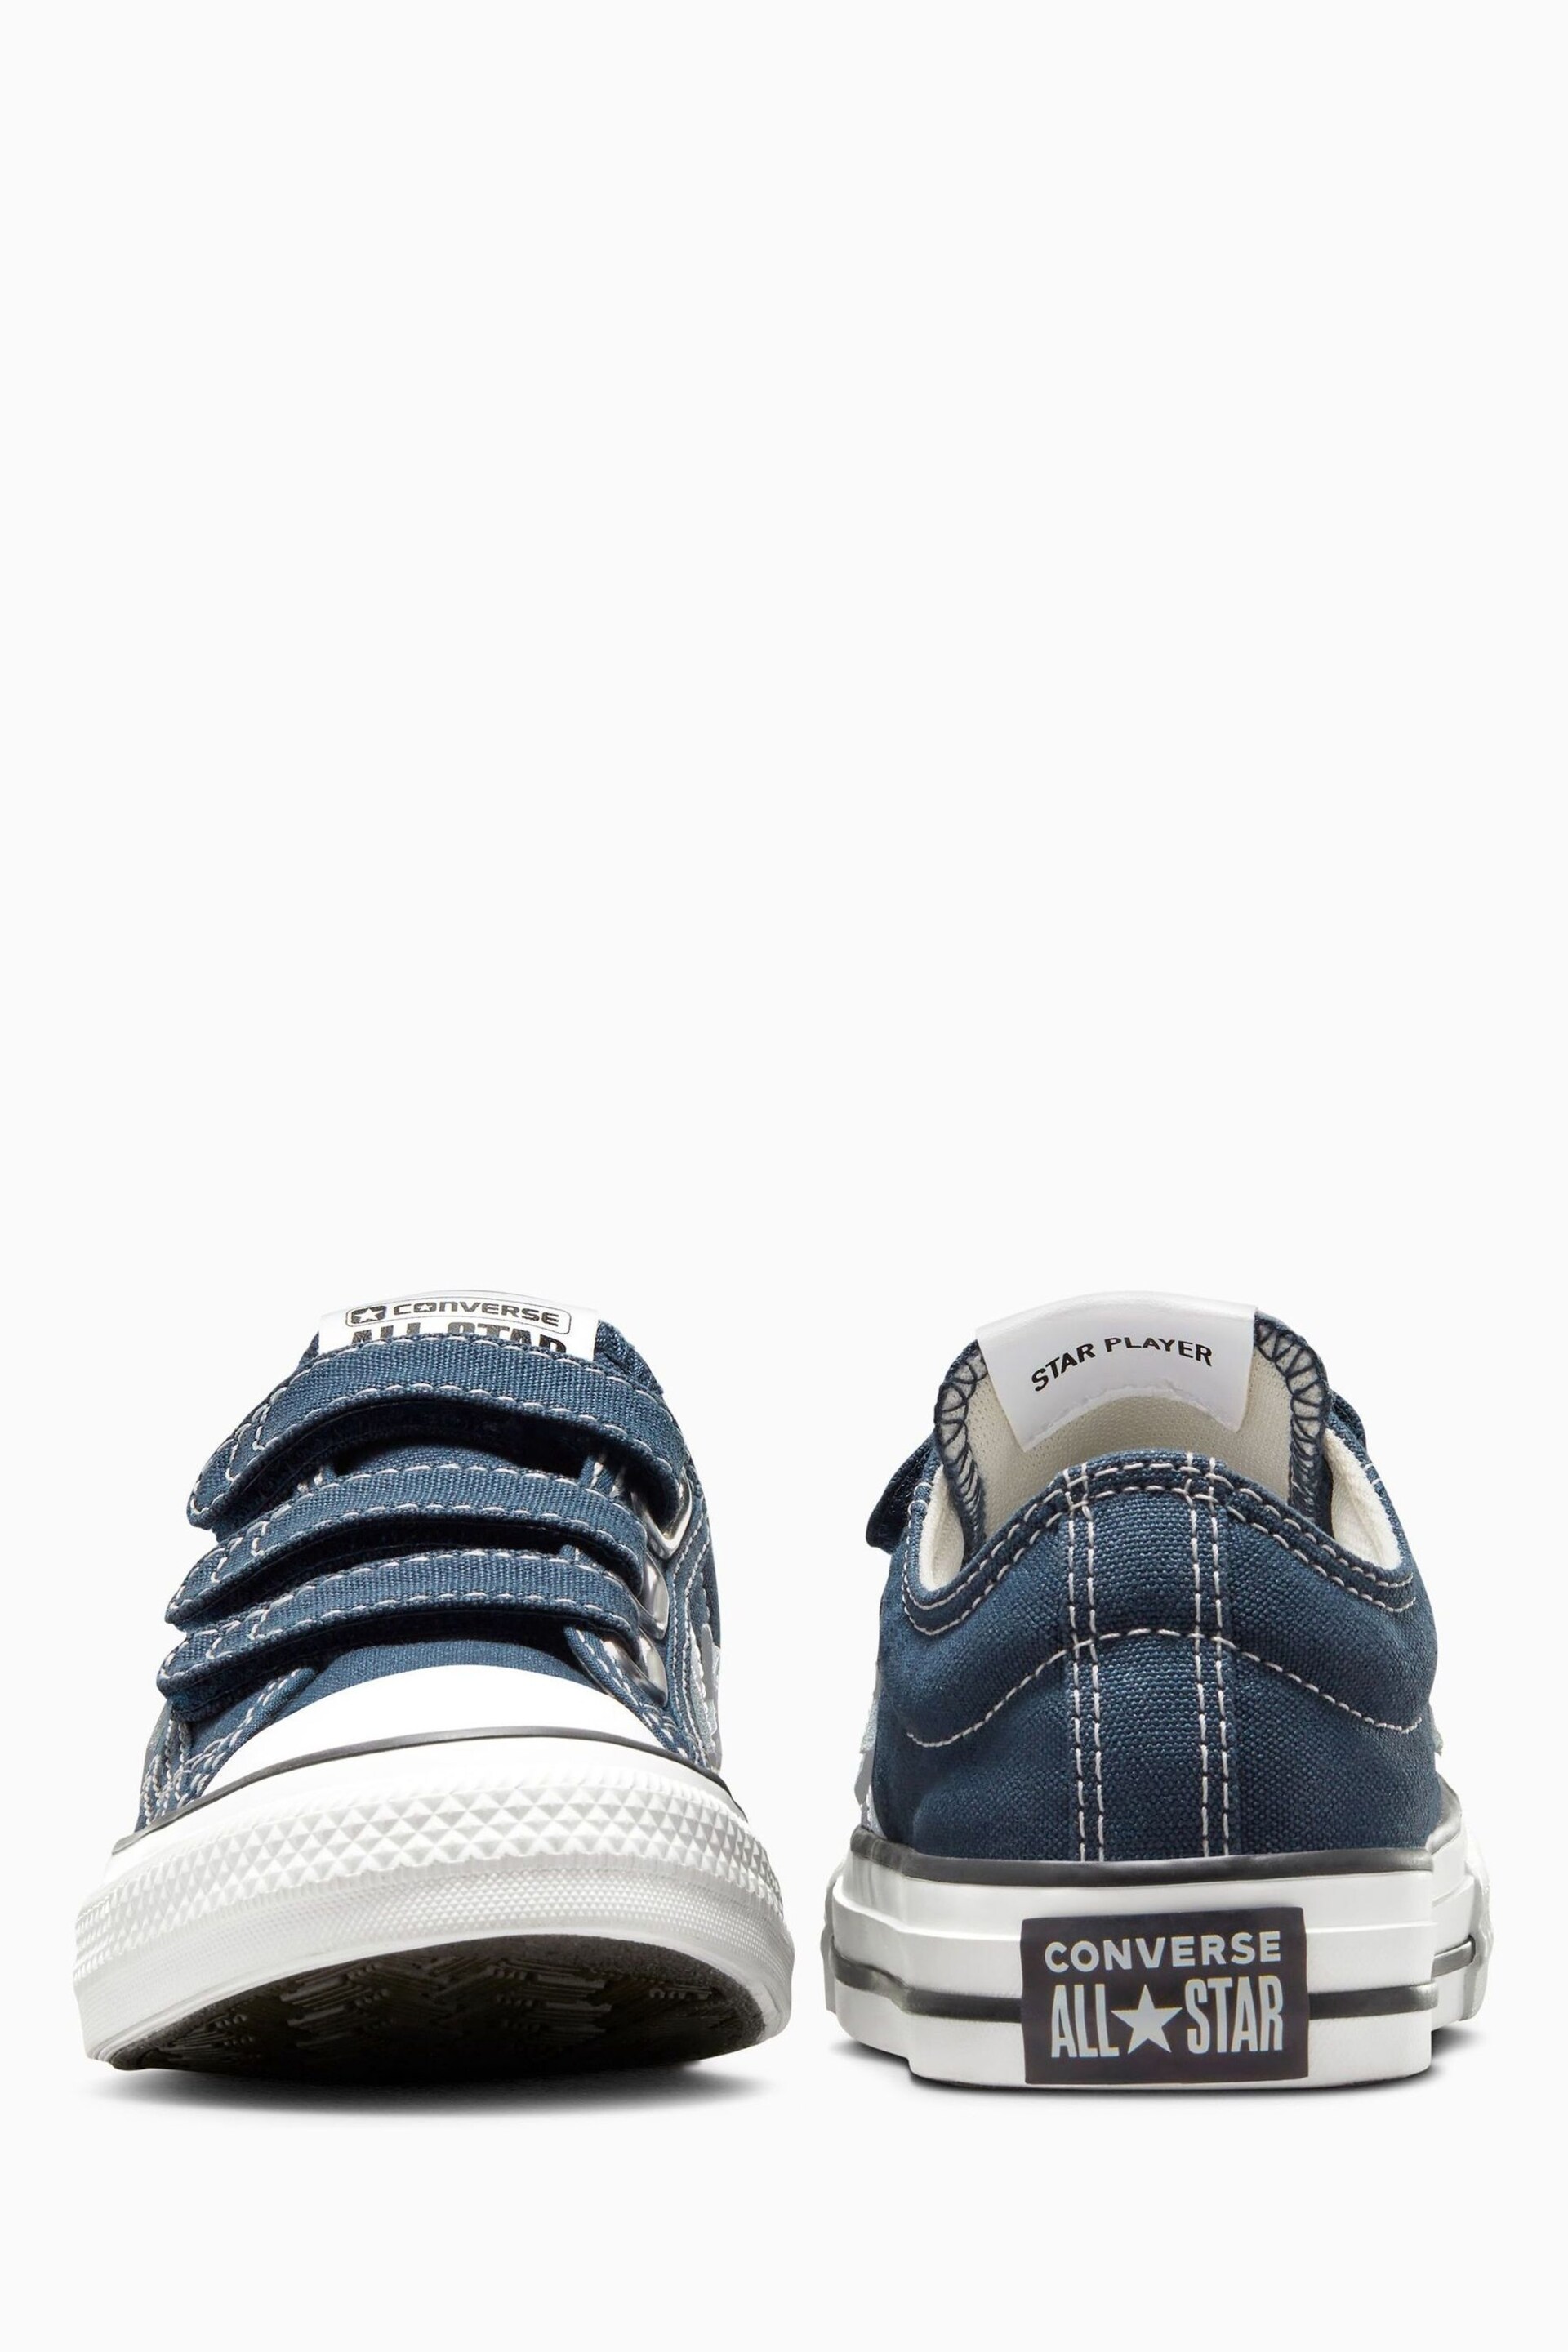 Converse Blue Junior Star Player 76 3V Easy On Trainers - Image 6 of 11